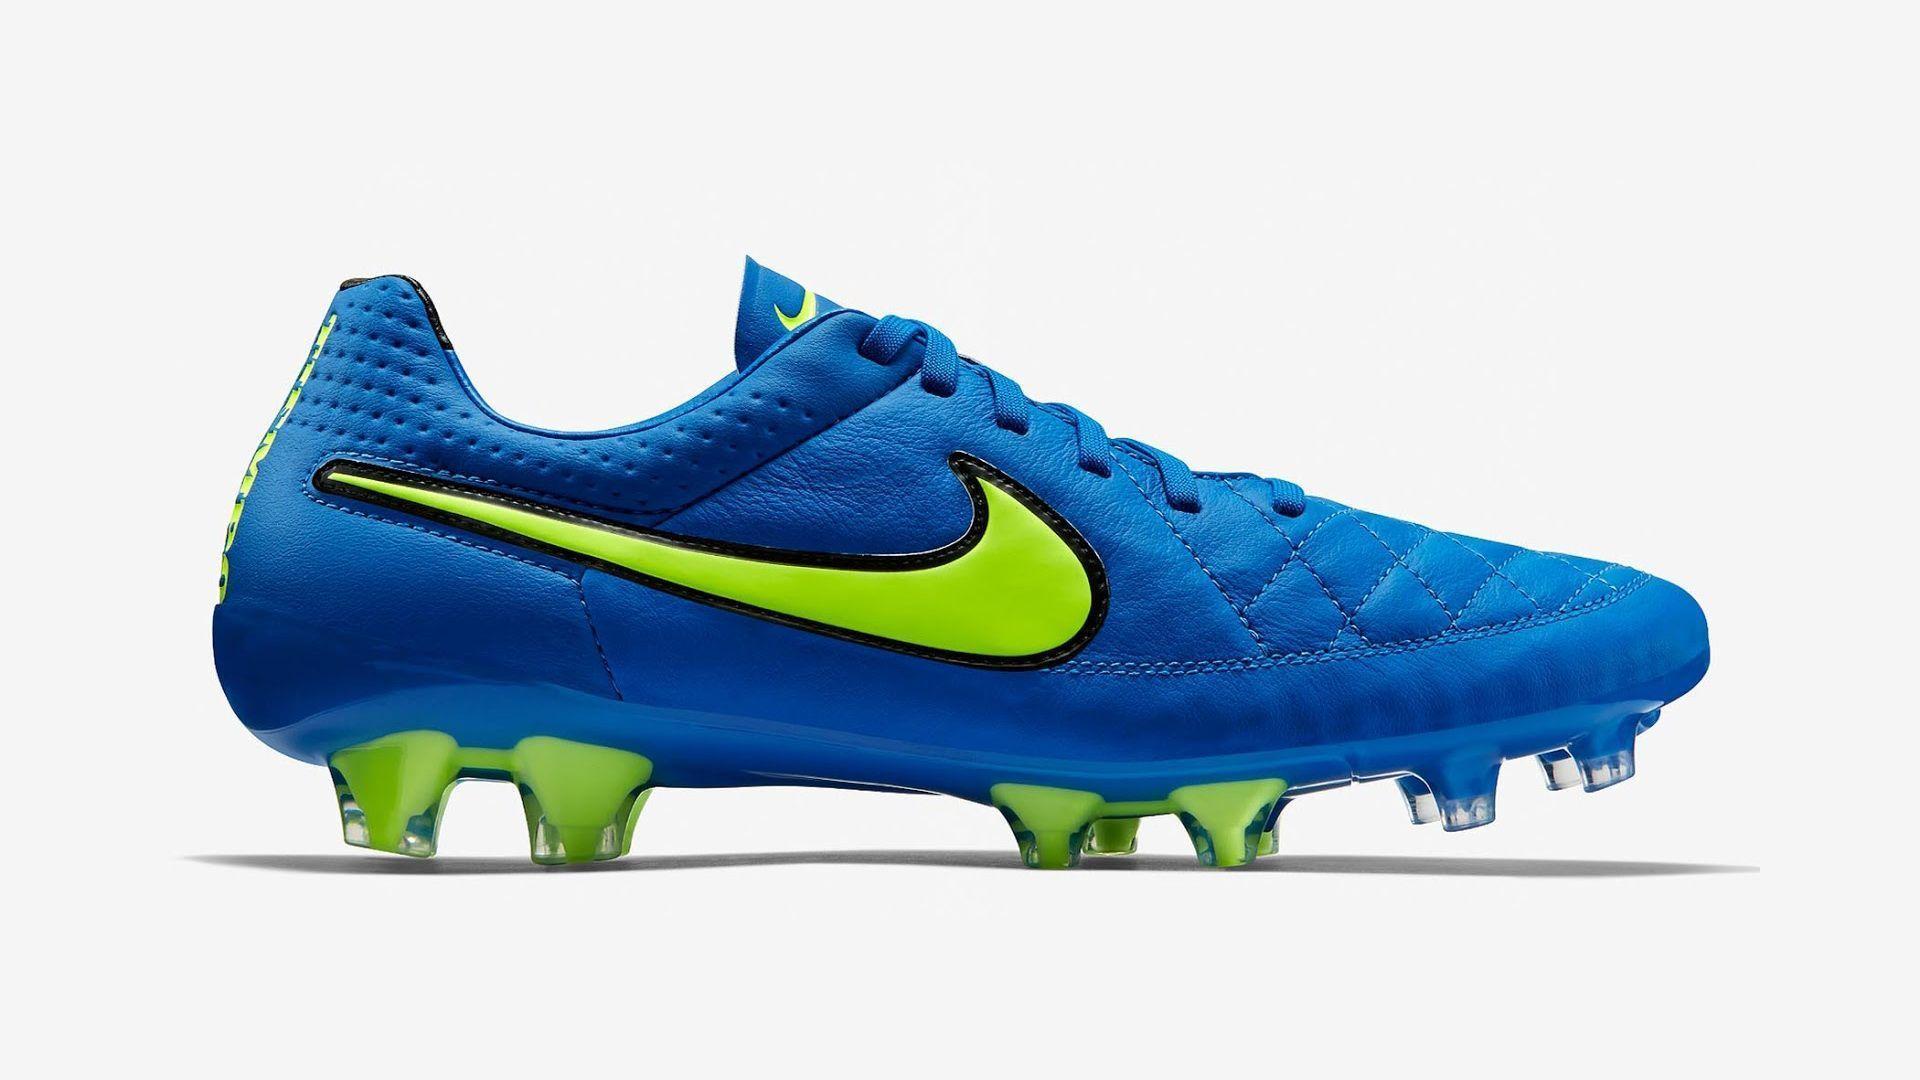 Blue Nike Tiempo Legend V 2015 Soccer Cleat Wallpaper Wide or HD